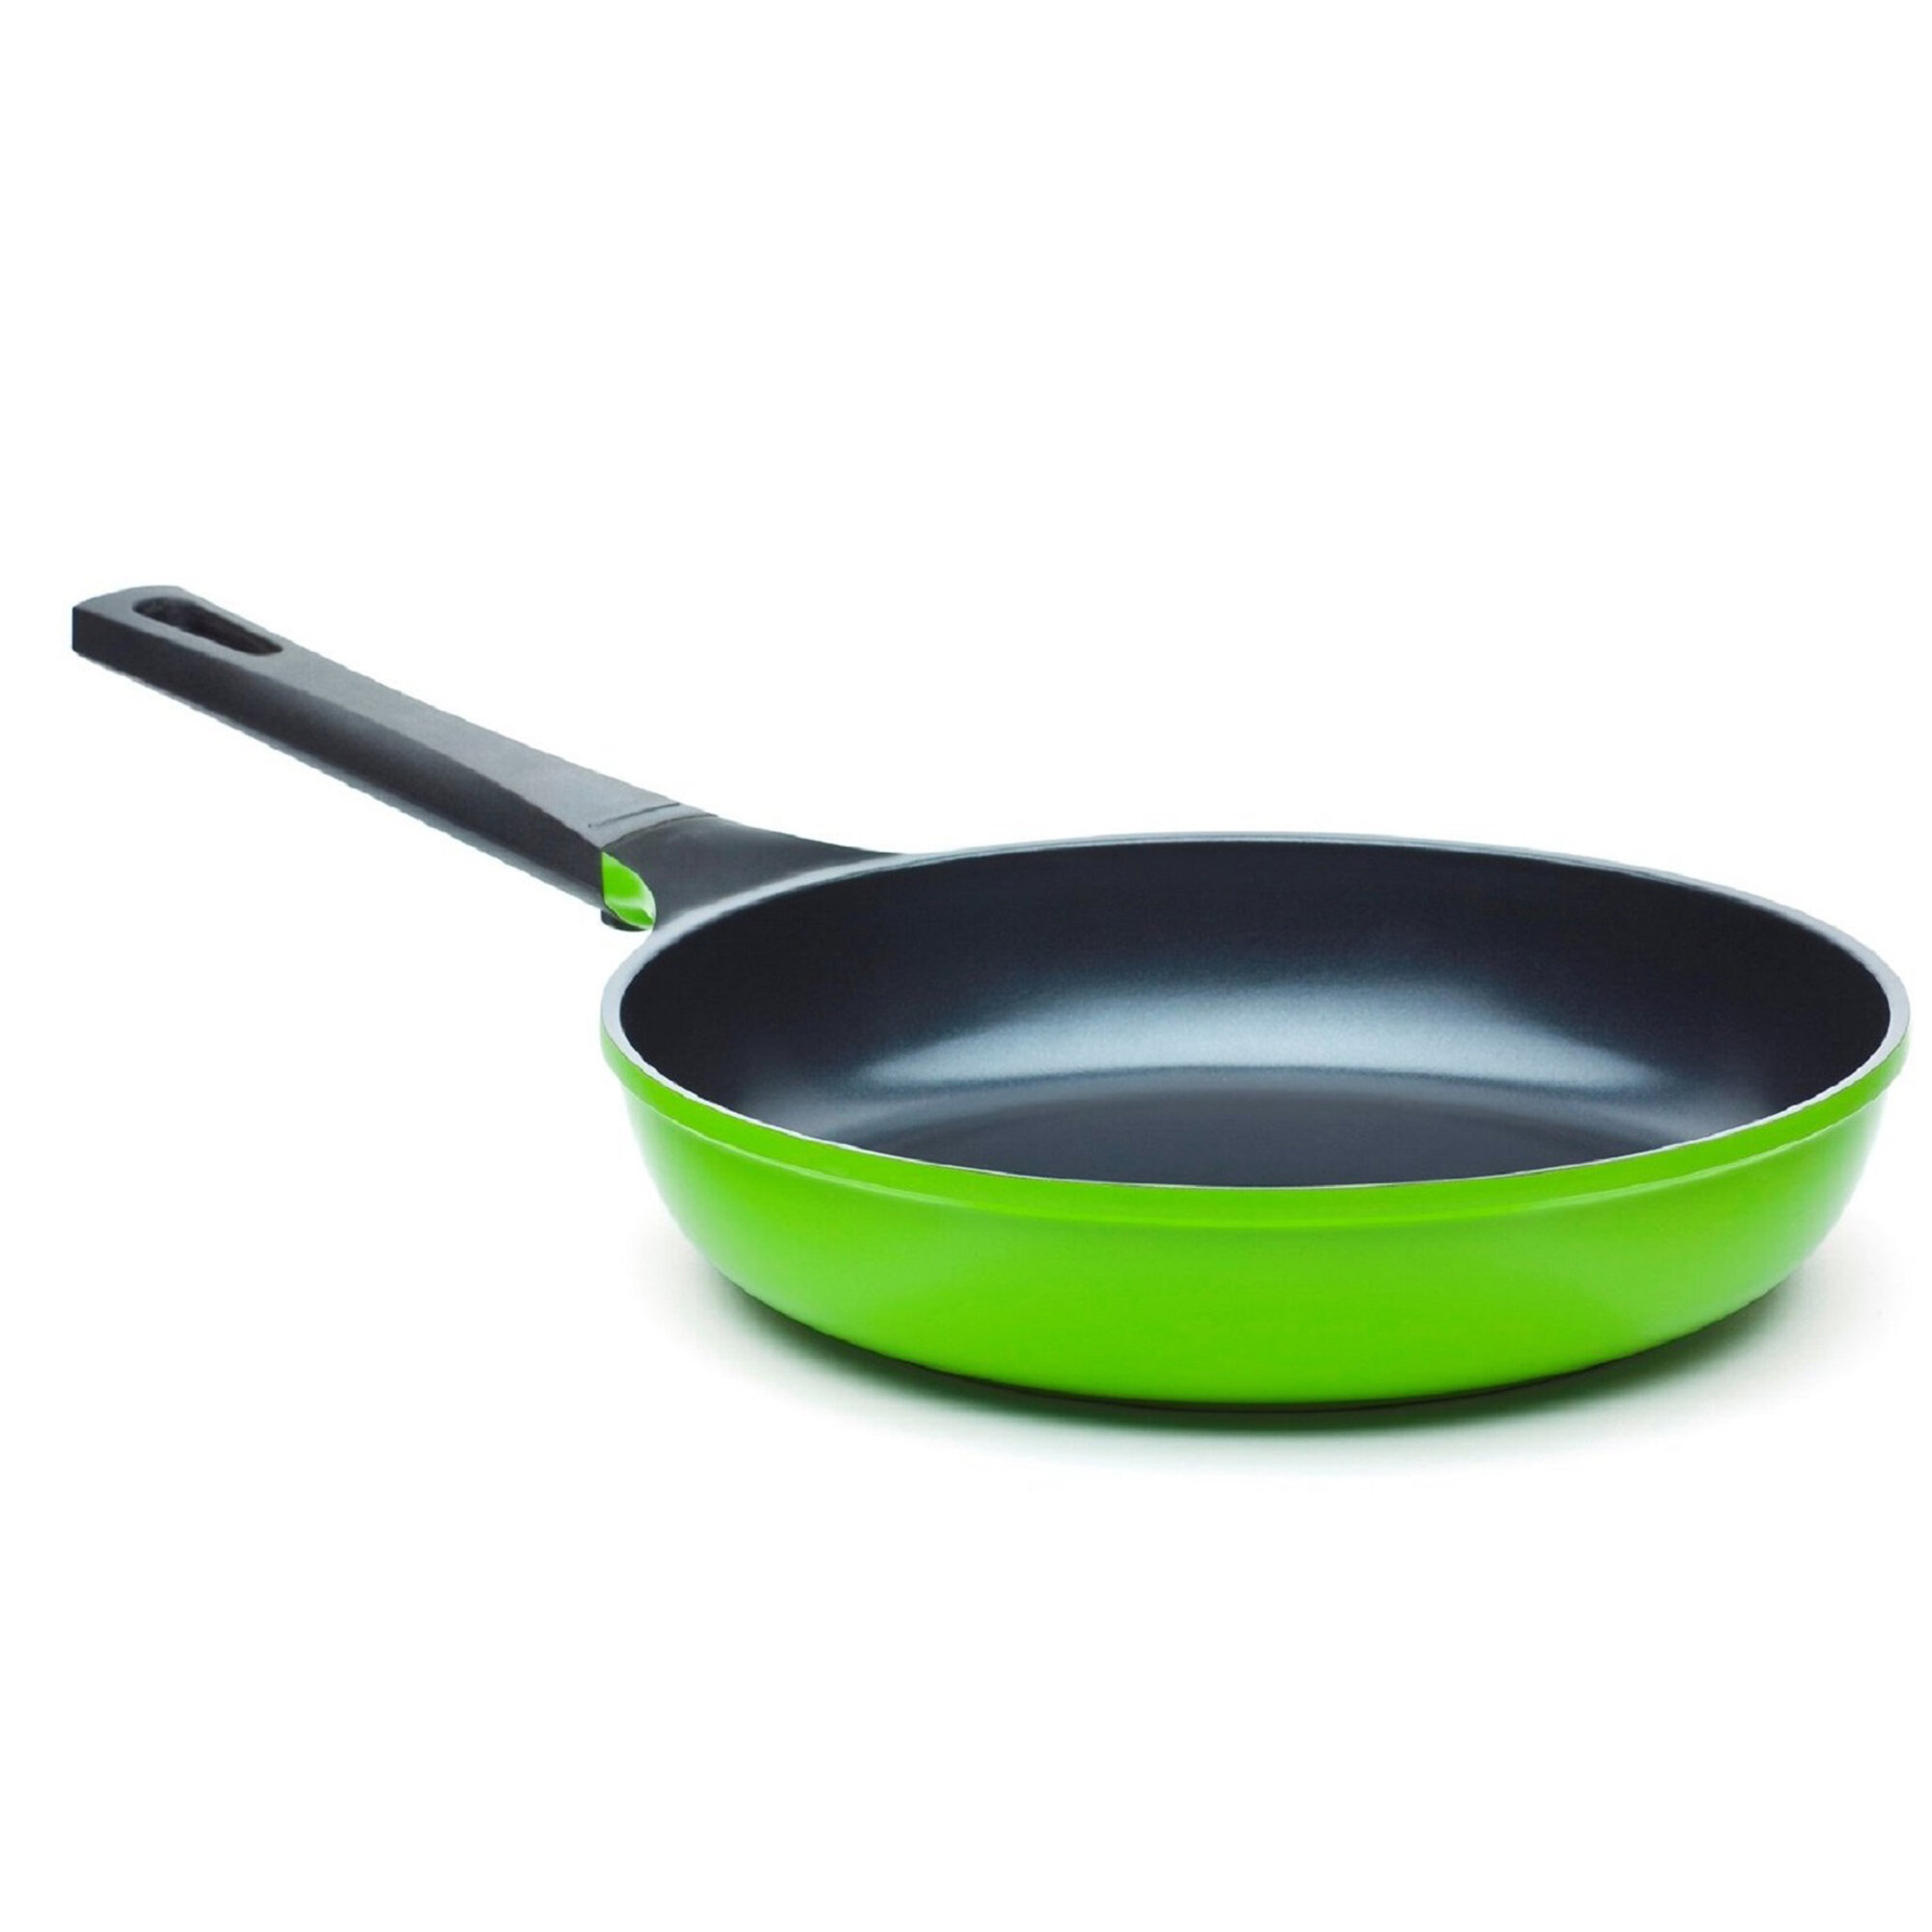 12 Stone Earth Frying Pan by Ozeri, with 100% APEO & PFOA-Free Stone-Derived Non-Stick Coating from Germany